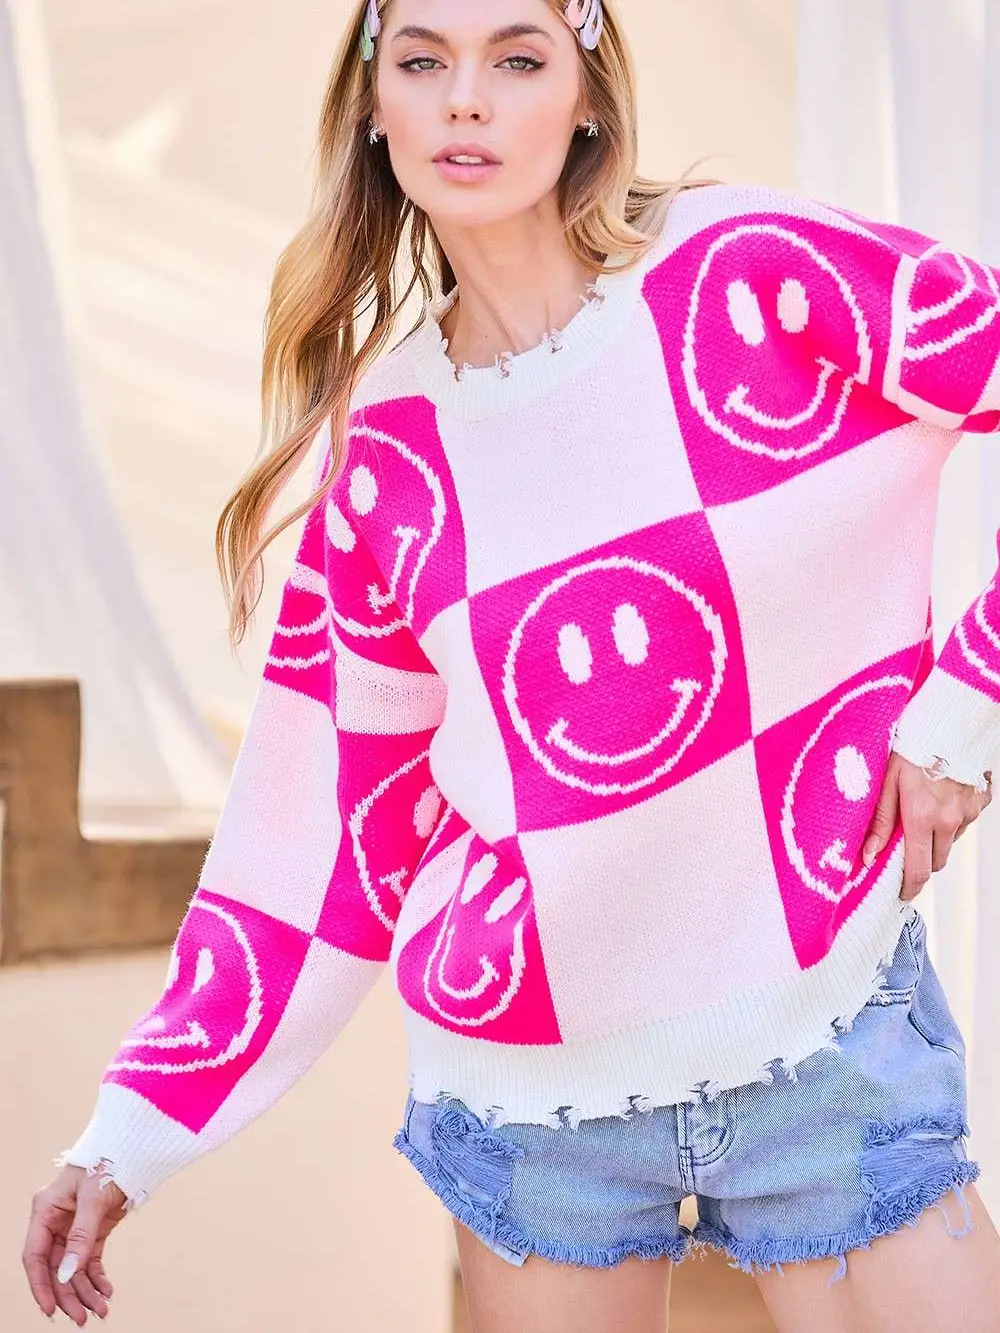 Smiley Sweater